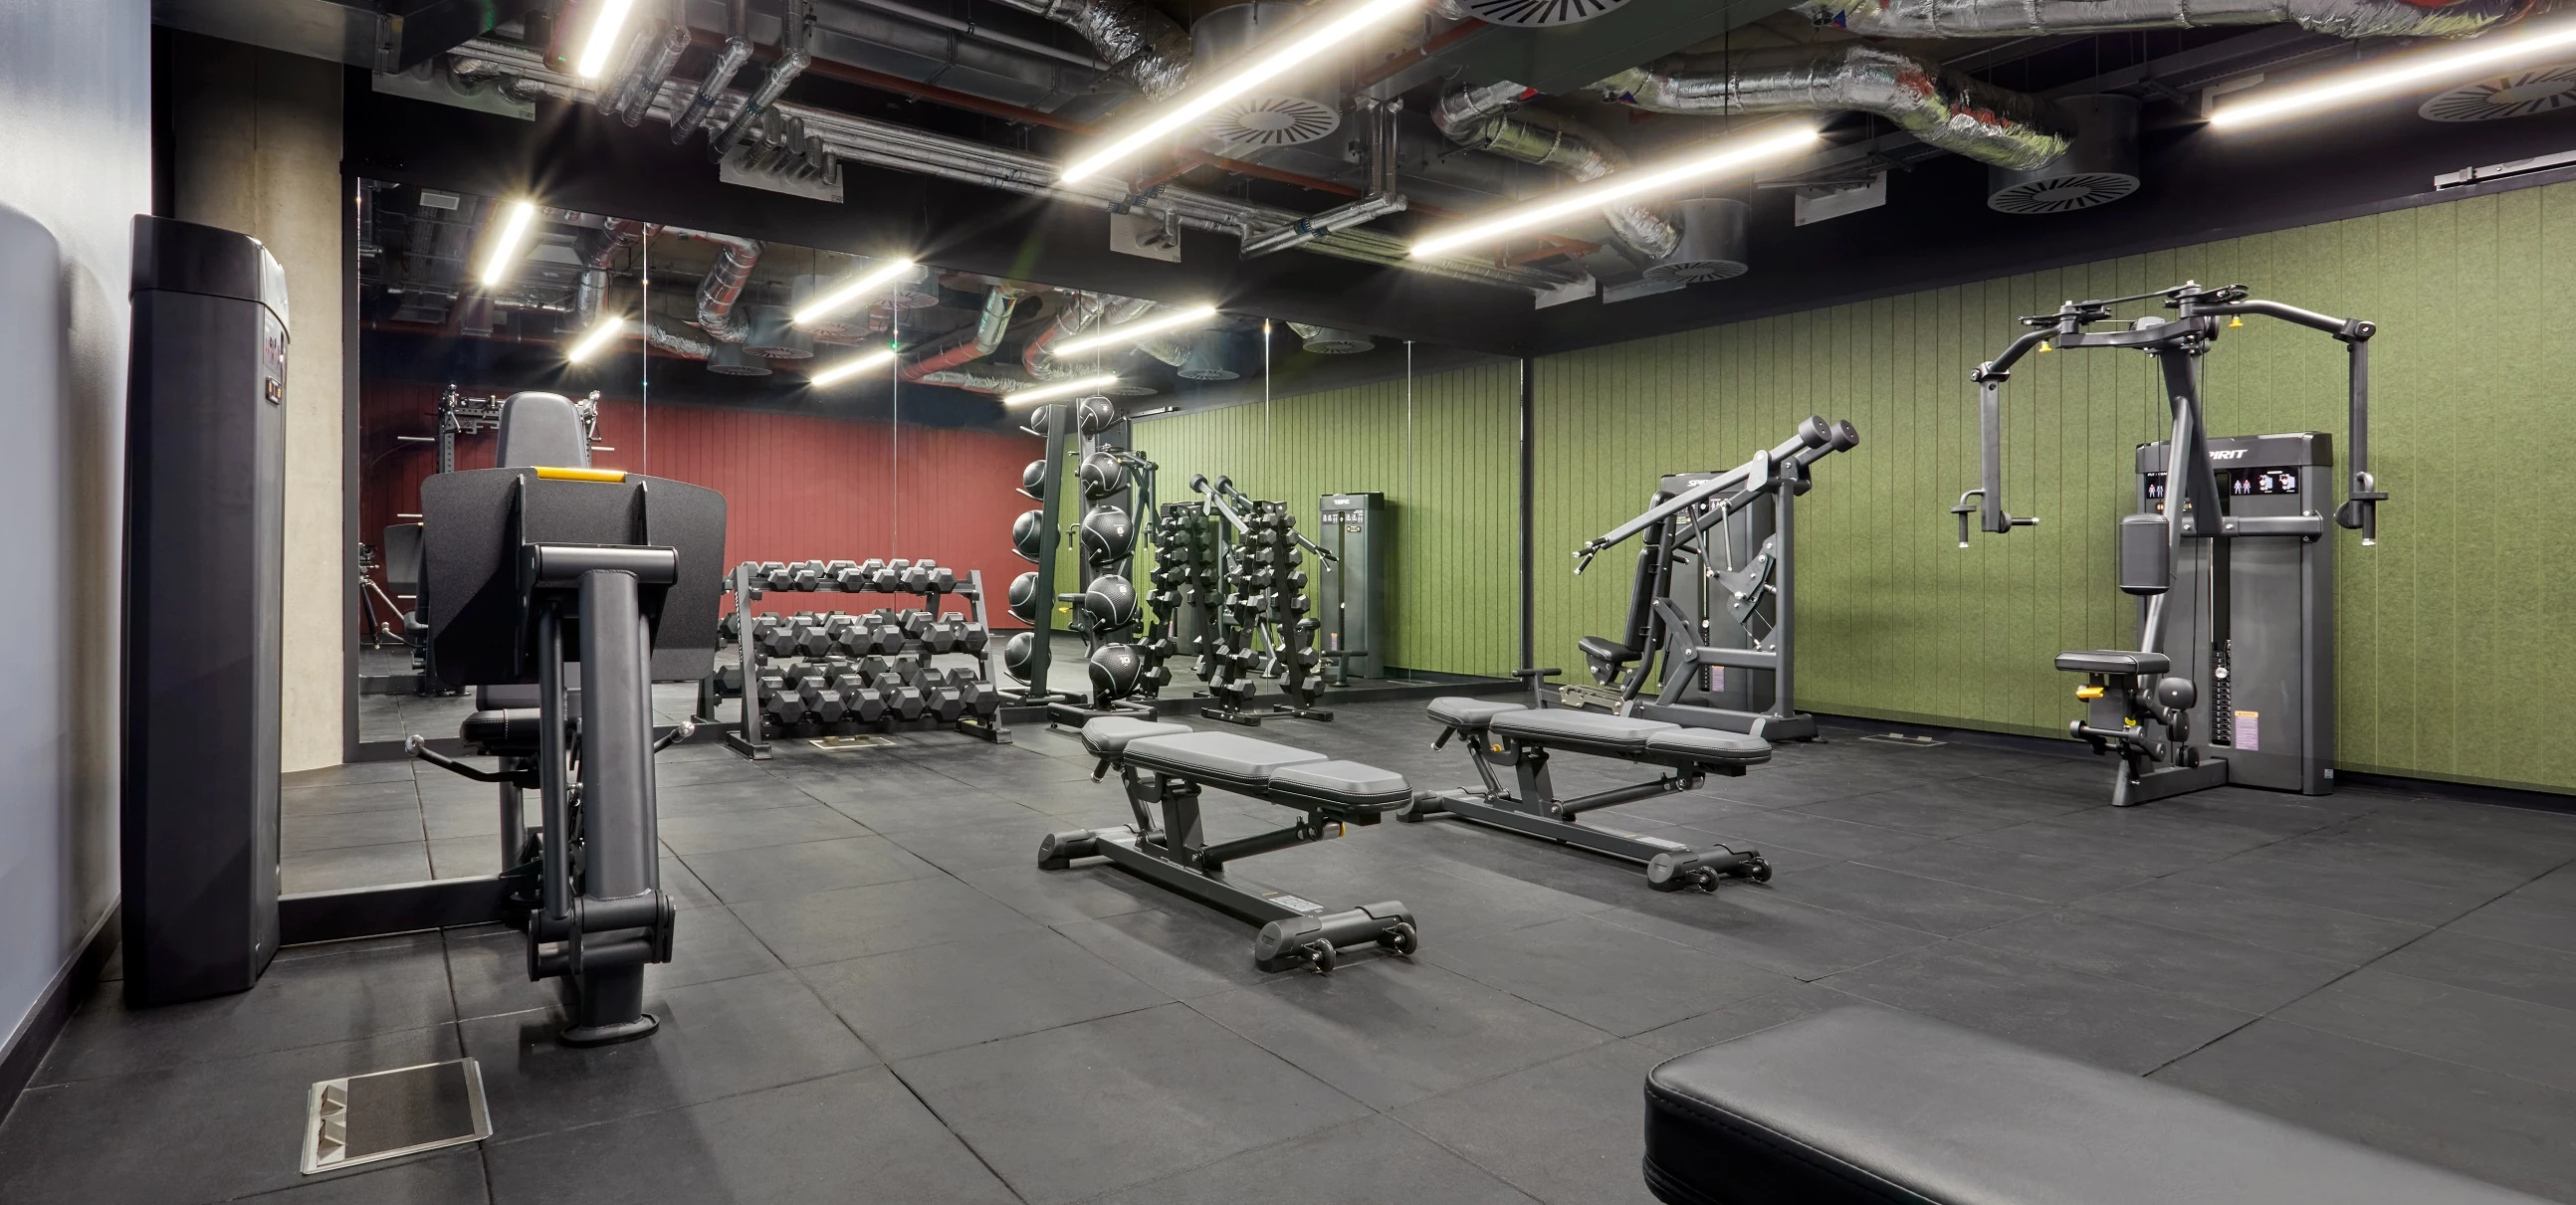 Dyaco UK facilitates innovative new Milton Keynes workplace hub, Unity Place, with state-of-the-art fitness equipment